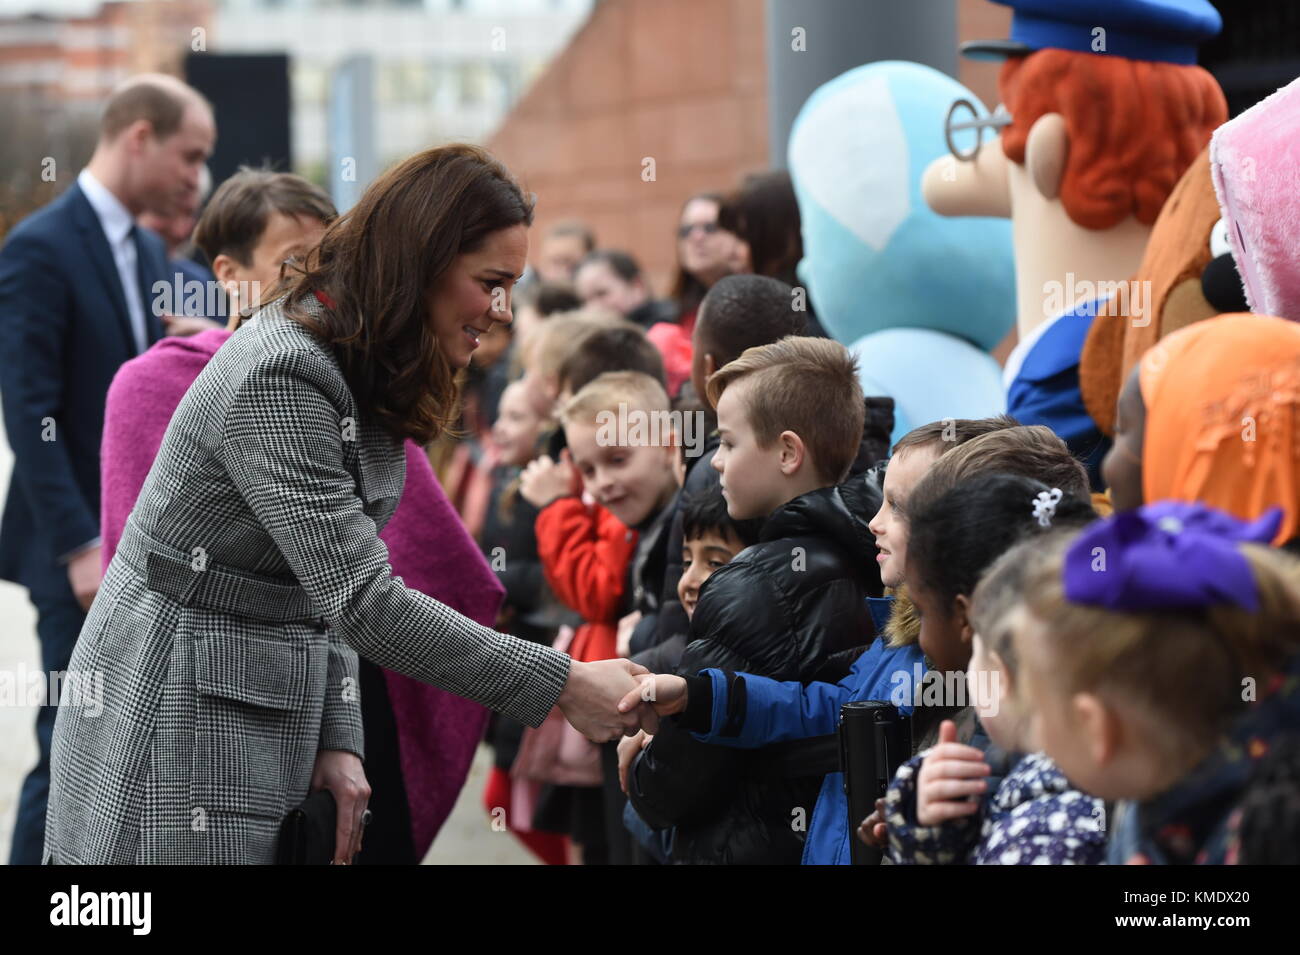 The Duchess of Cambridge greets well-wishers as she arrives for the Children's Global Media Summit at Manchester Central Convention Complex, which brings together creatives, technology innovators, policymakers, executives and thought leaders from around the globe to inform and redesign the future of media for this generation and explore the impact that digital technology will have in children&Otilde;s futures. Stock Photo